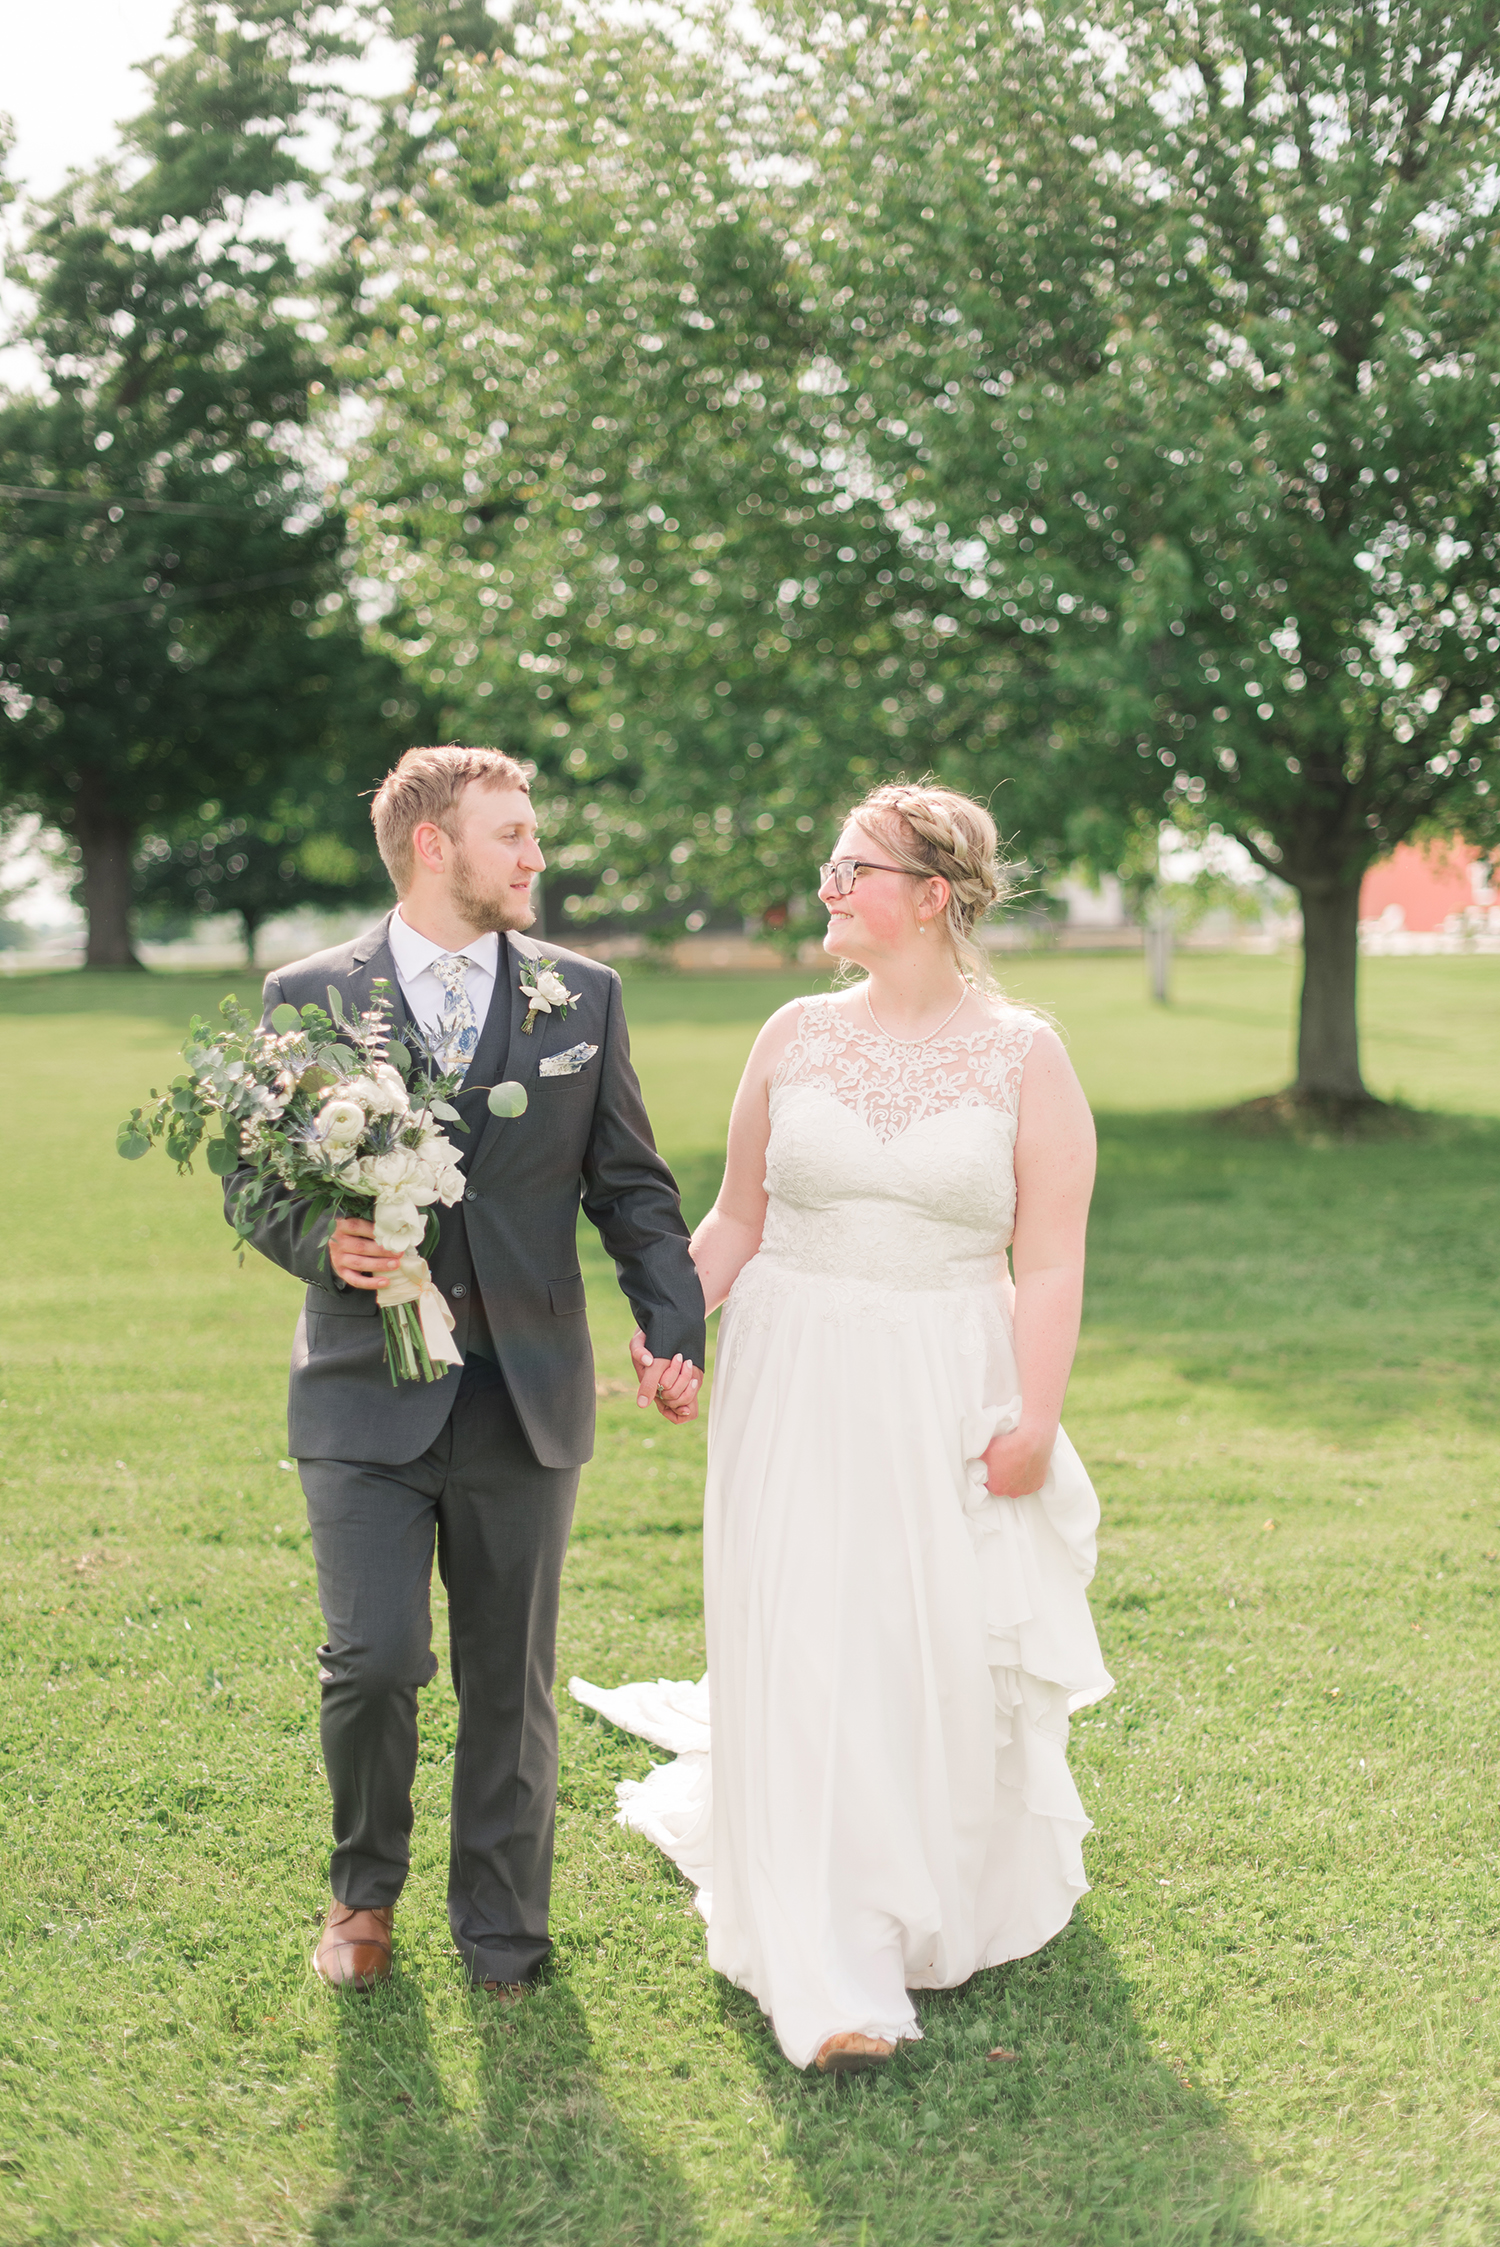 This beautiful Michigan barn wedding is everything you could want in an intimate spring celebration. If you're planning a small wedding, this one is sure to inspire you!